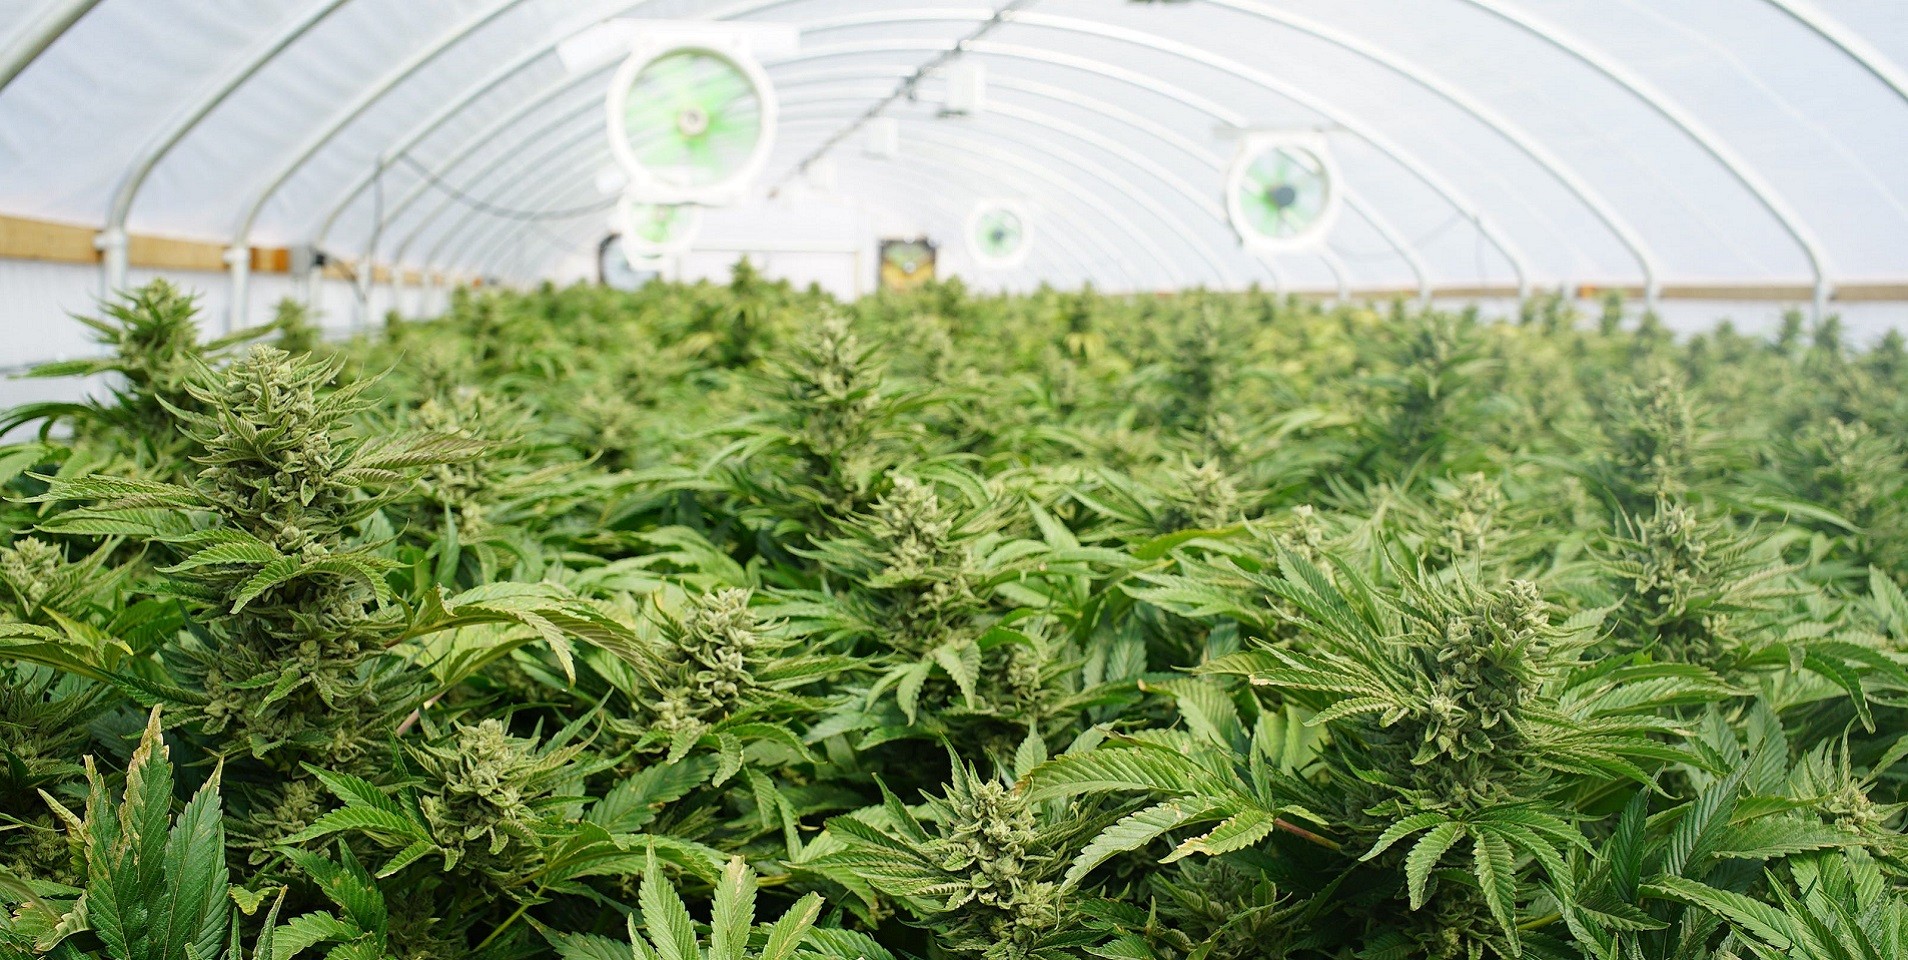 Do’s and Don’ts of Commercial Cannabis Harvesting